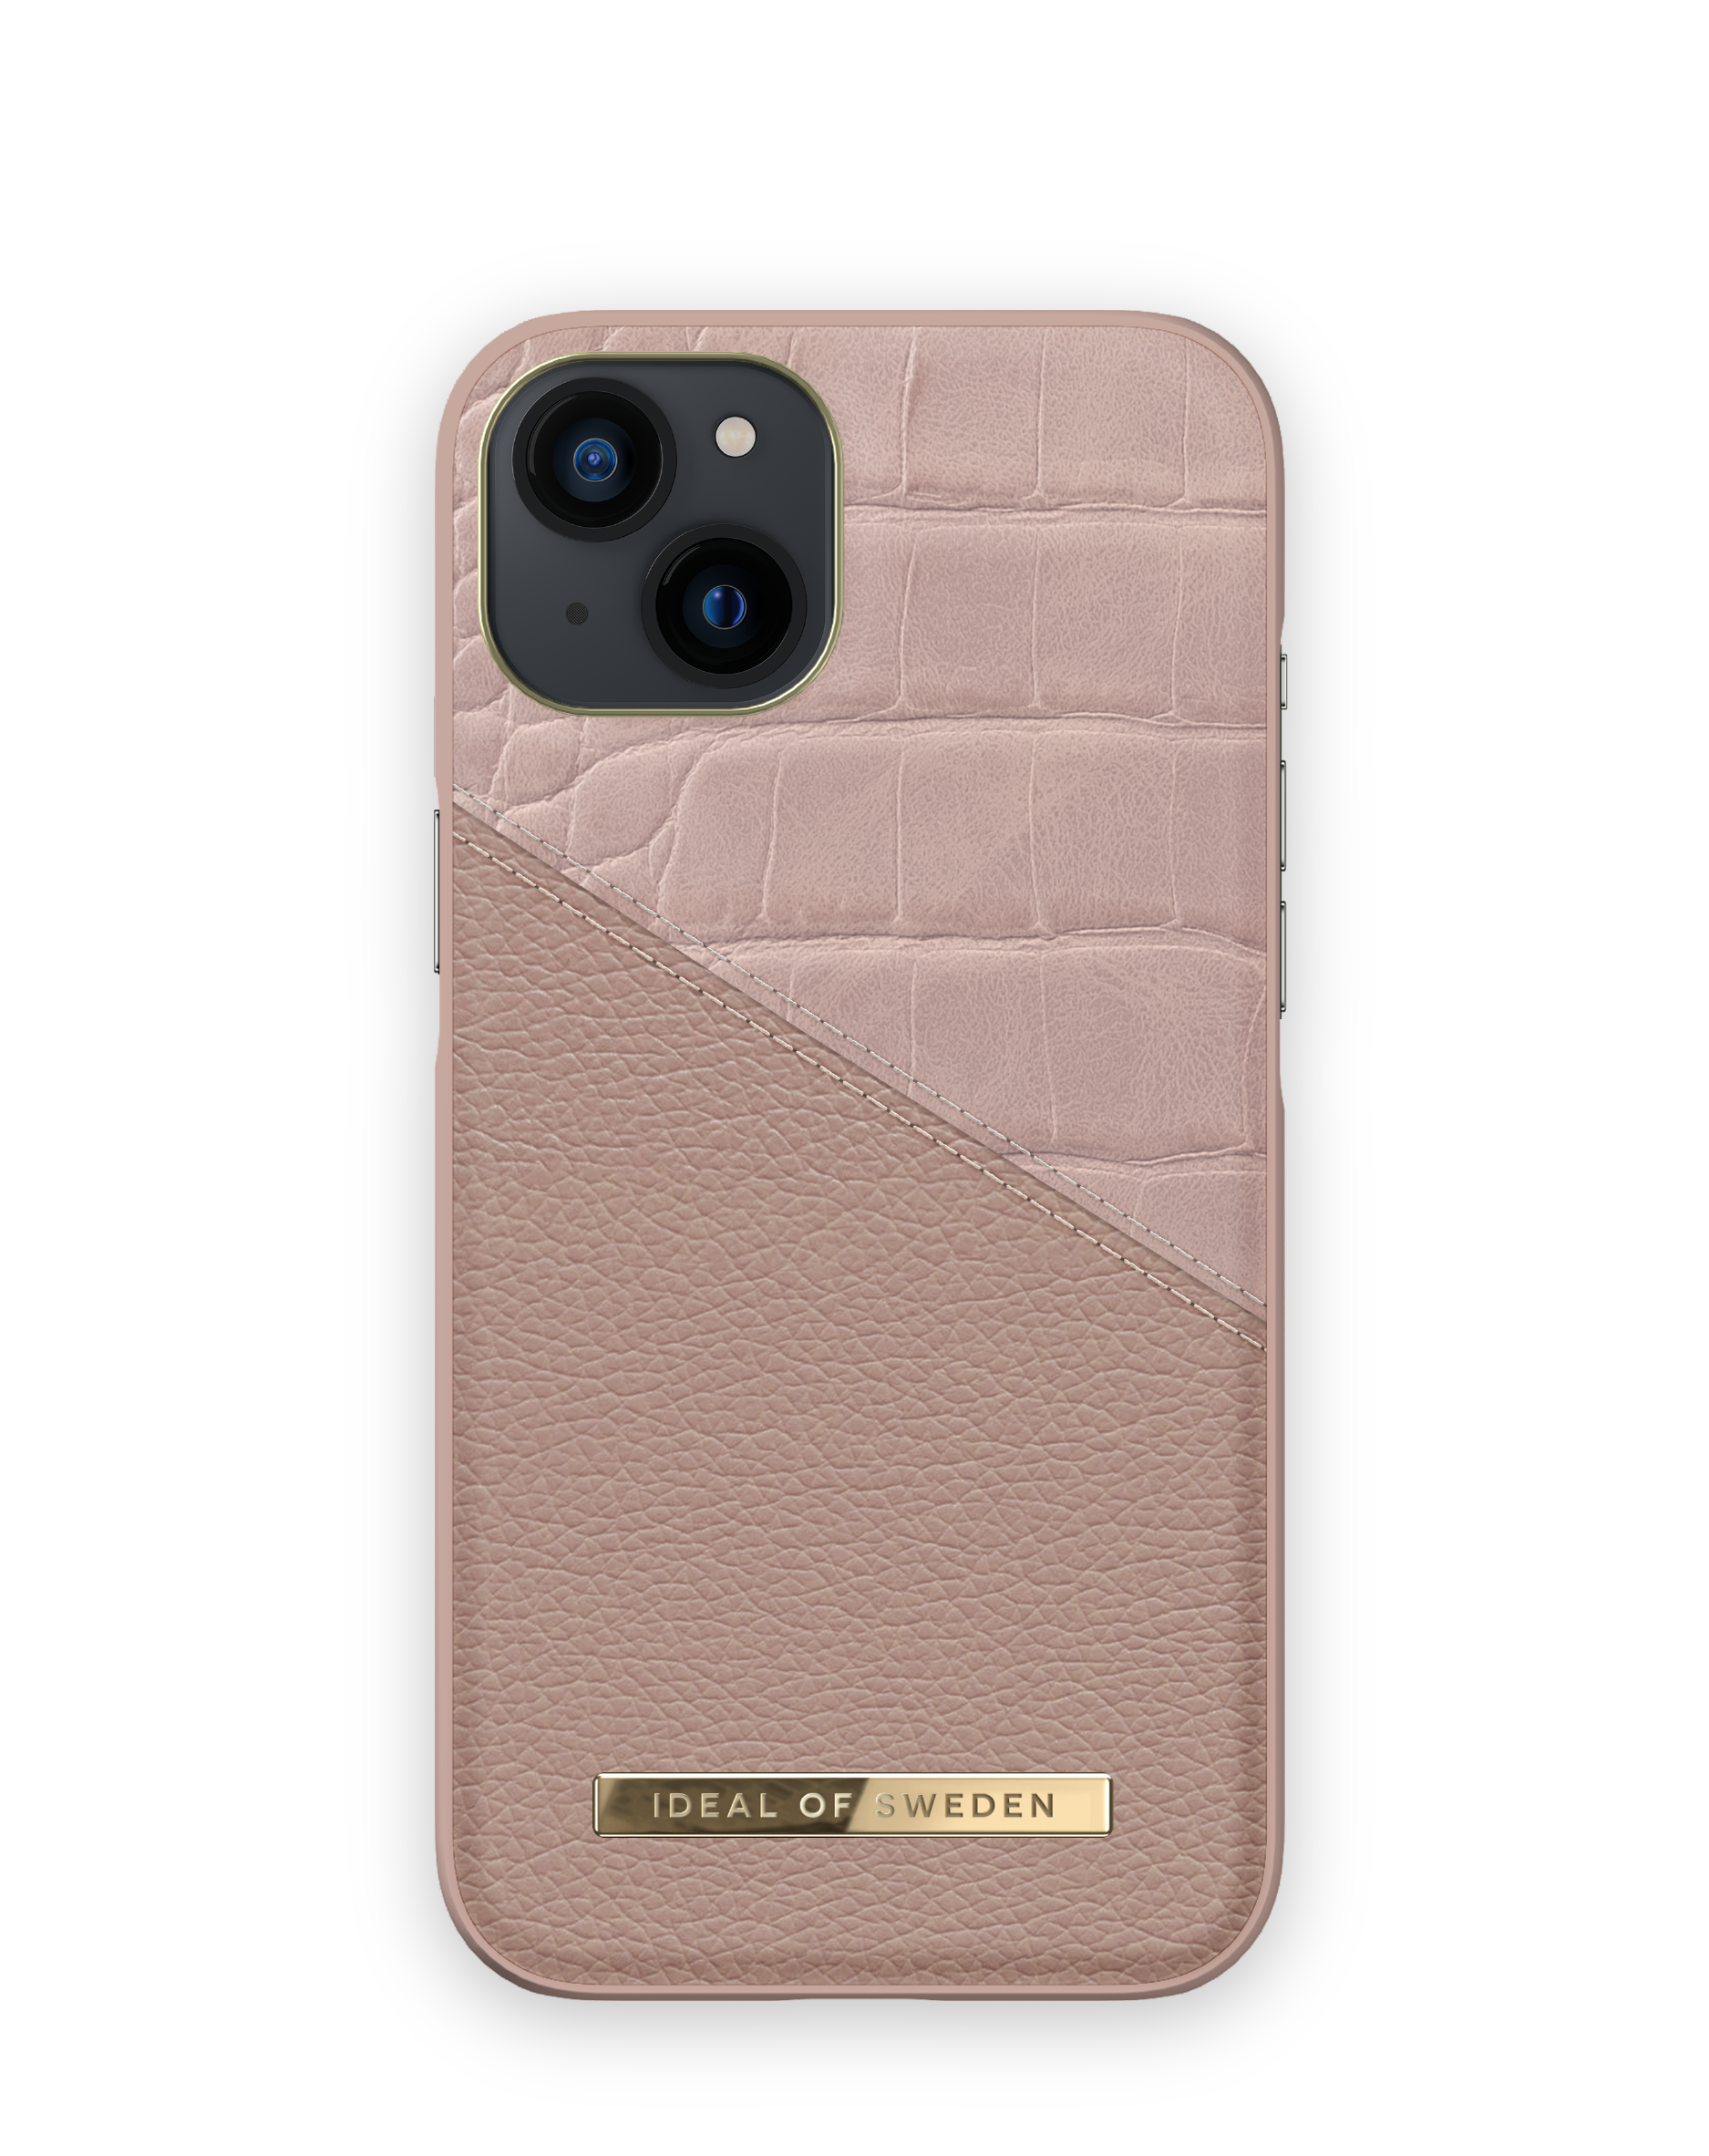 IDEAL OF Apple, Smoke Croco Rose 13, SWEDEN IDACSS20-I2161-202, iPhone Backcover